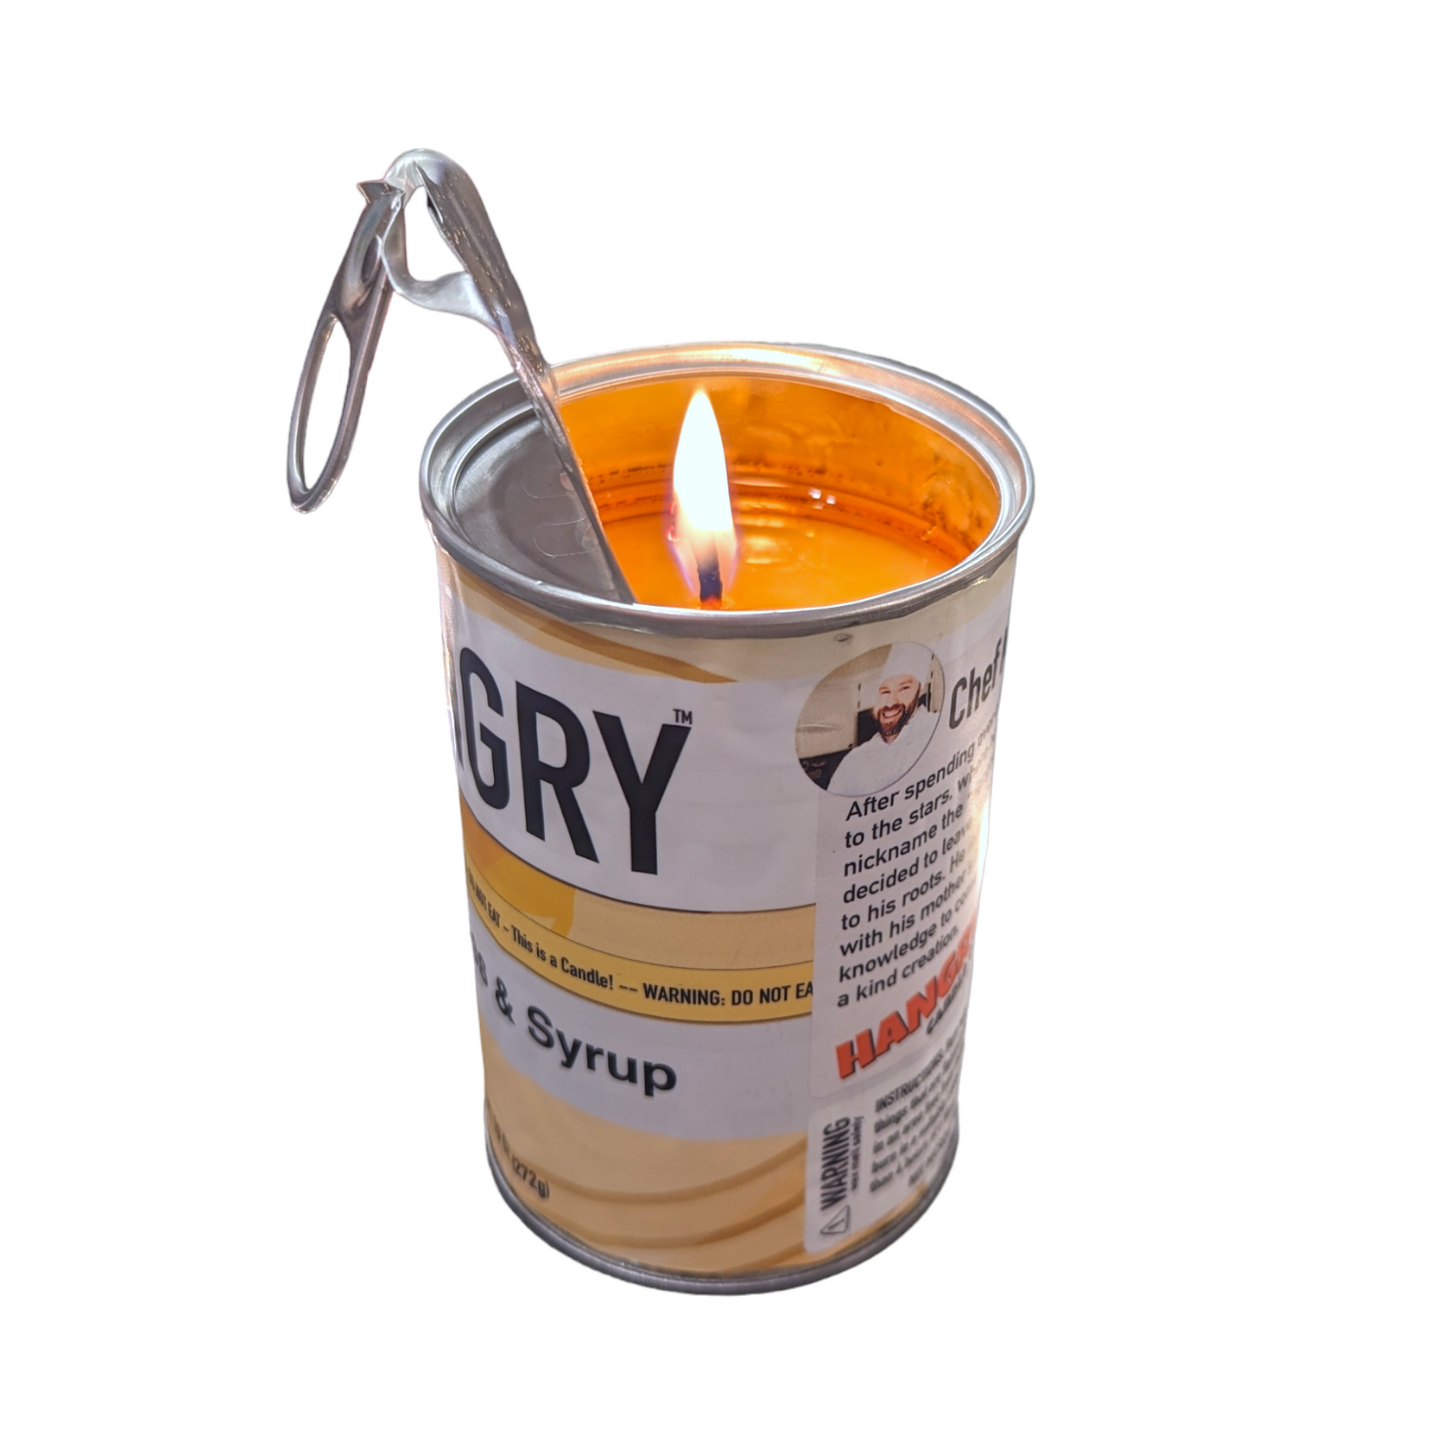 Hangry Canned Food Scented Candles